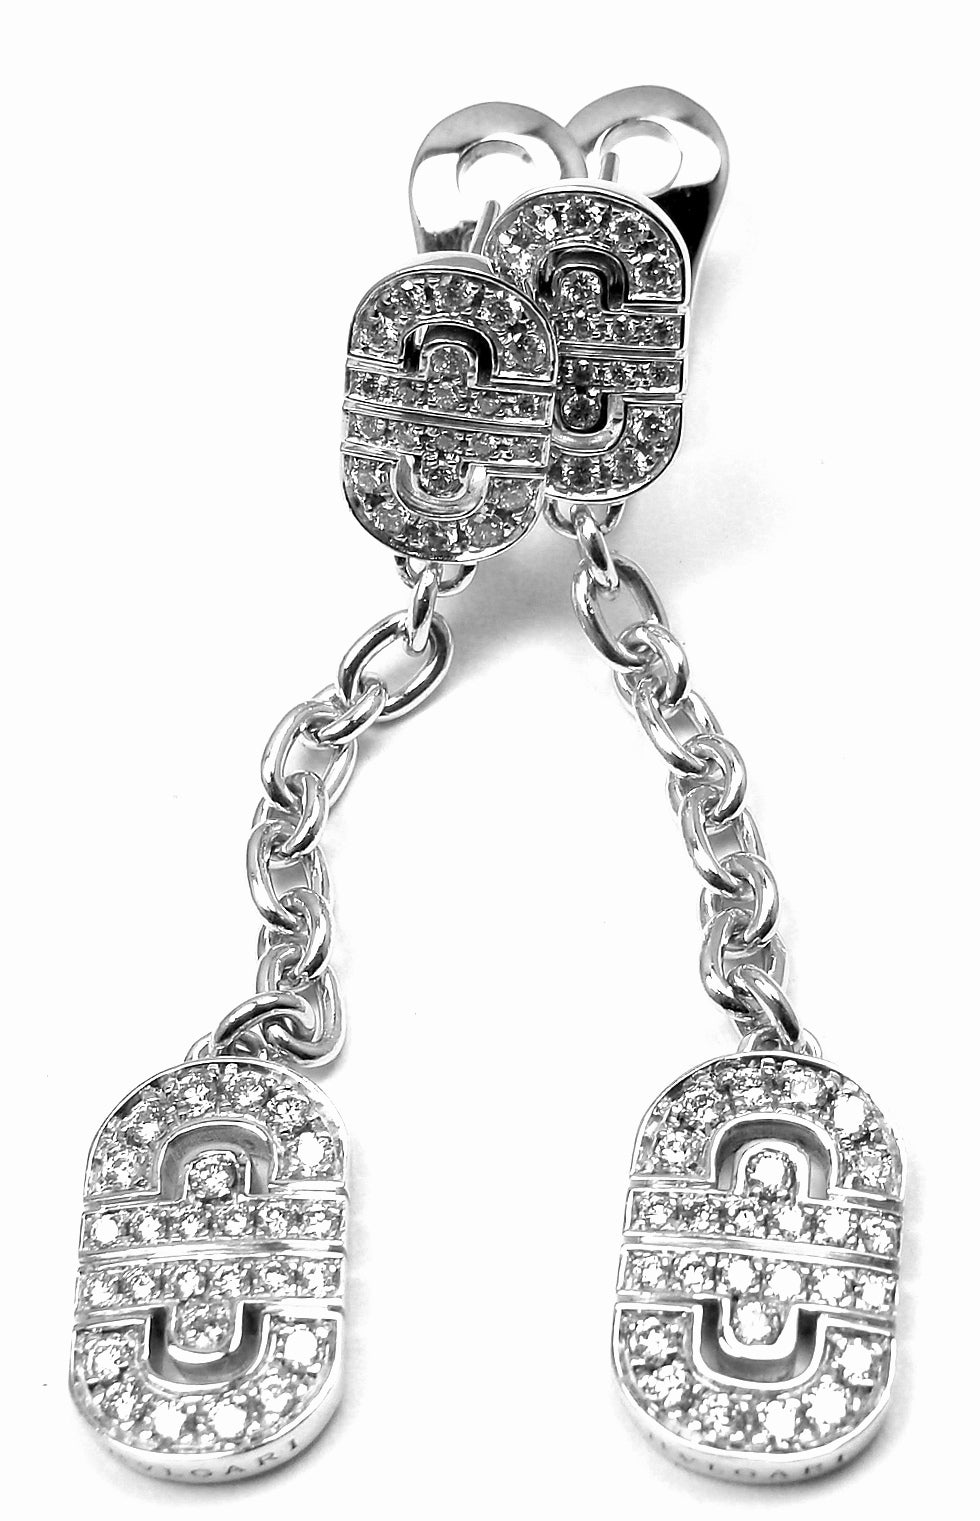 18k White Gold Diamond Parentesi Drop Earrings by Bulgari. 
With 96 round brilliant cut diamonds VS1 clarity G color total weight approx. 2ct

Details:
Measurements: 2